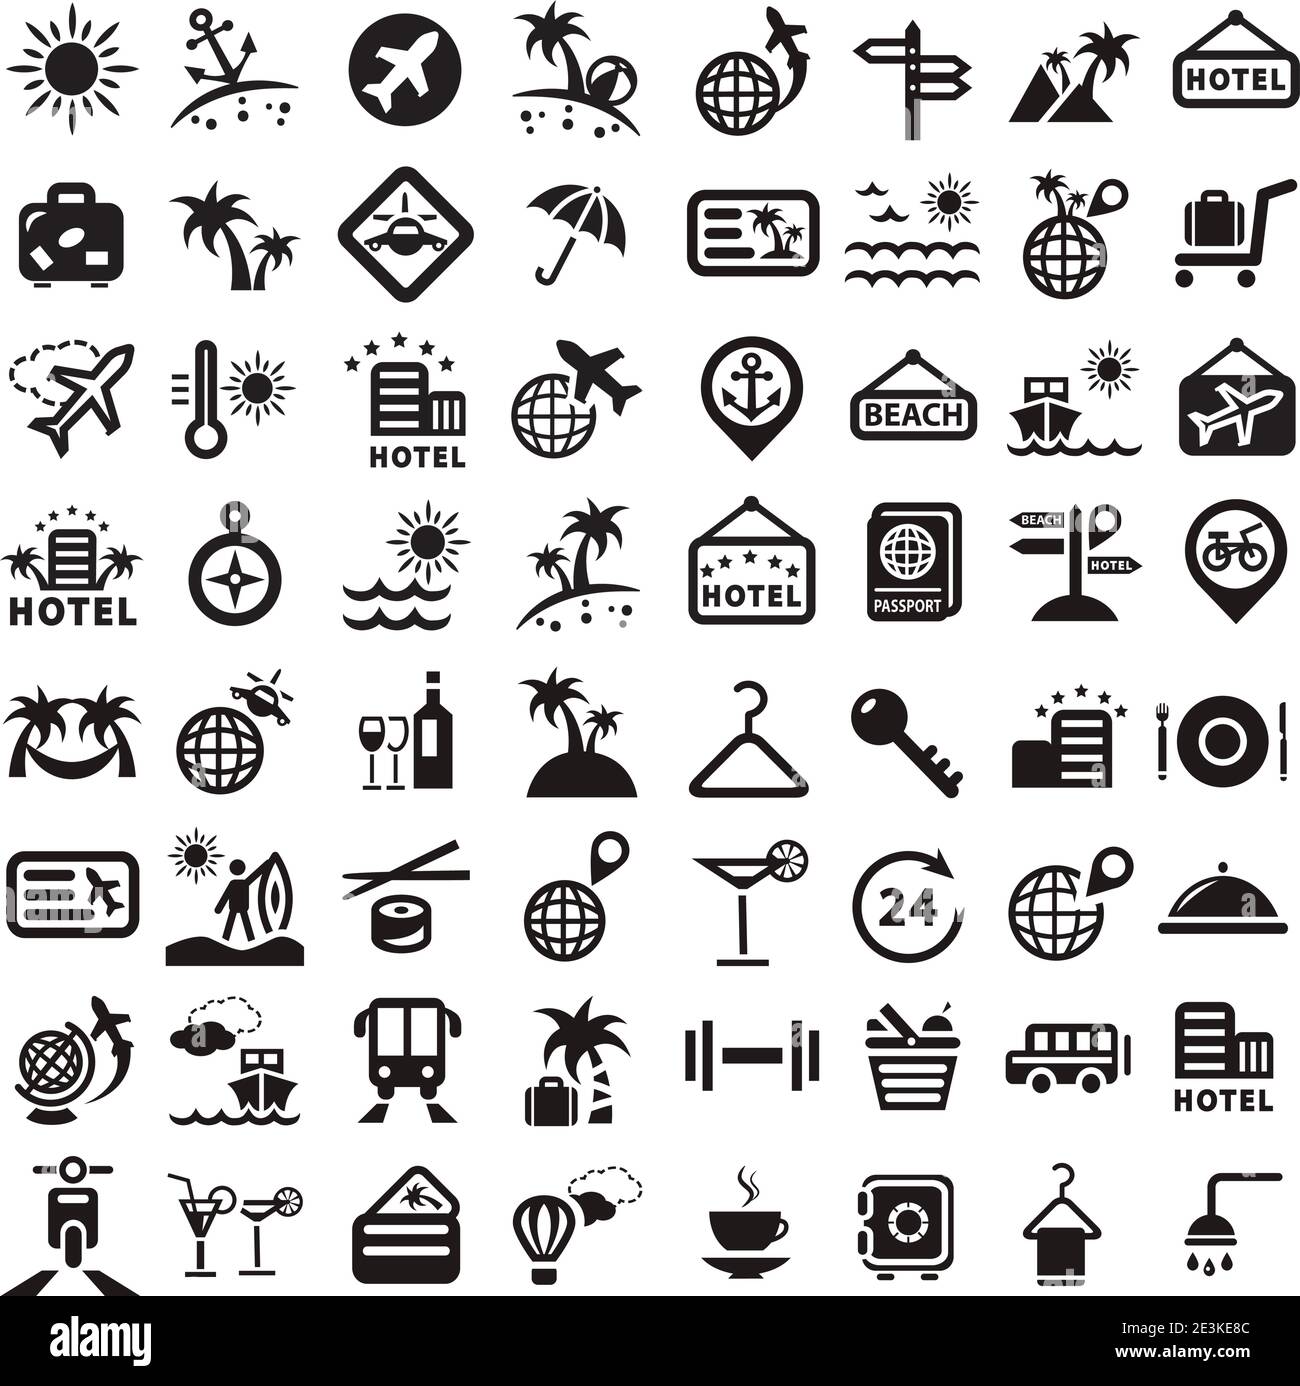 Elegant Travel Icons Set Created For Mobile, Web And Applications Stock ...